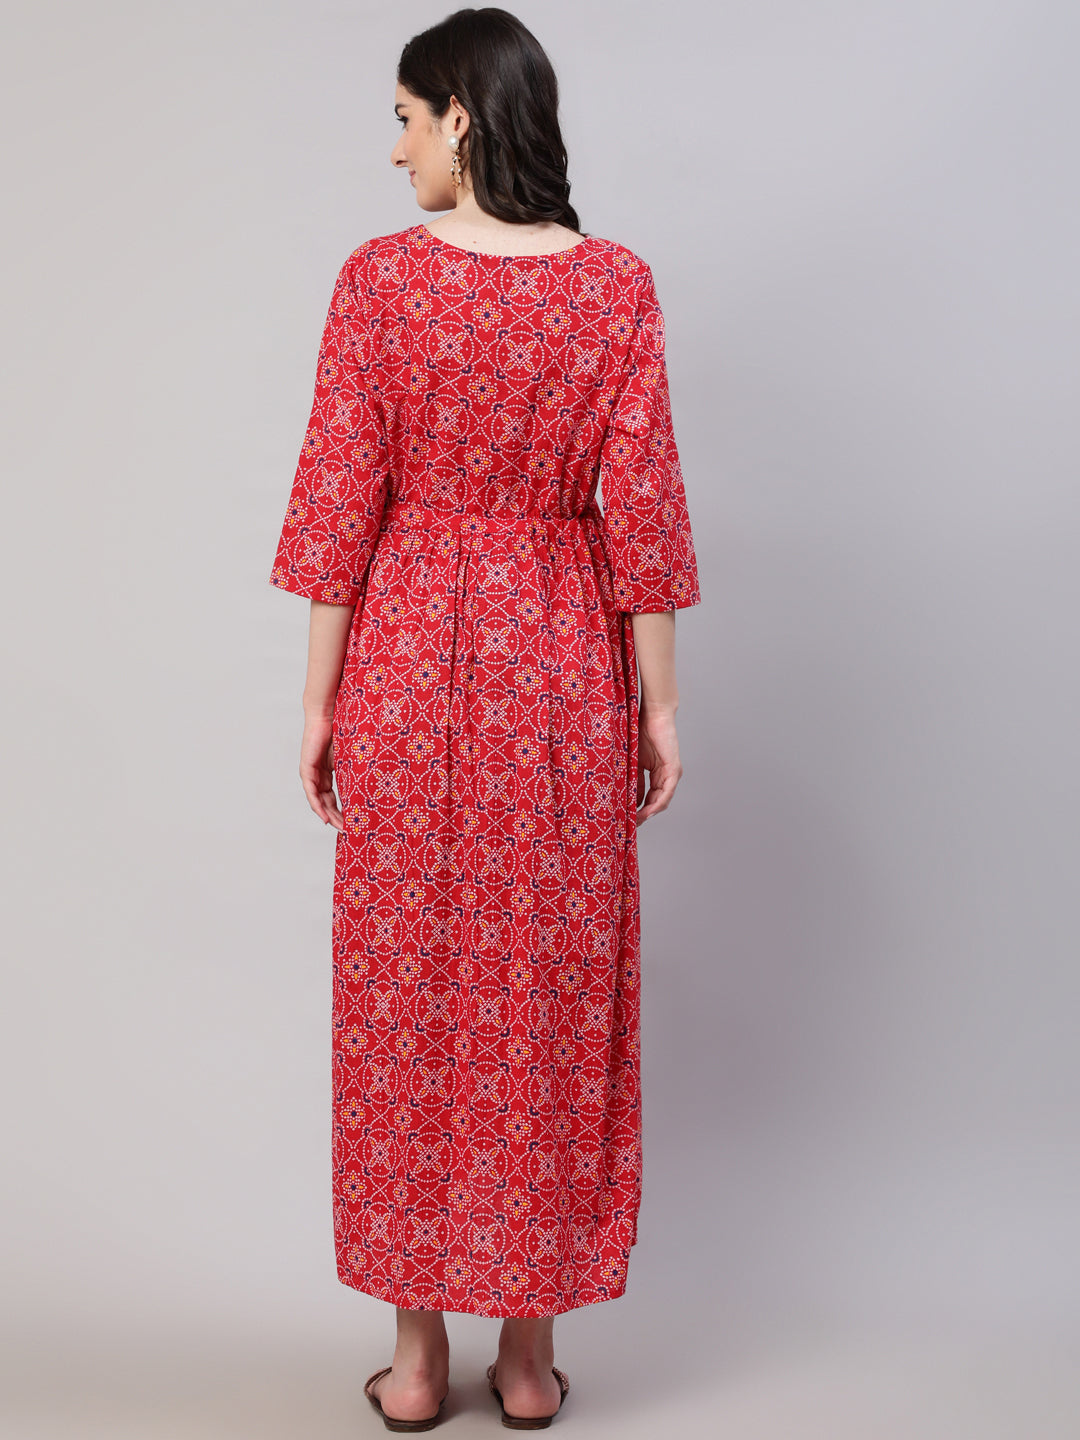 Women's Red Printed Flared Maternity Dress - Nayo Clothing